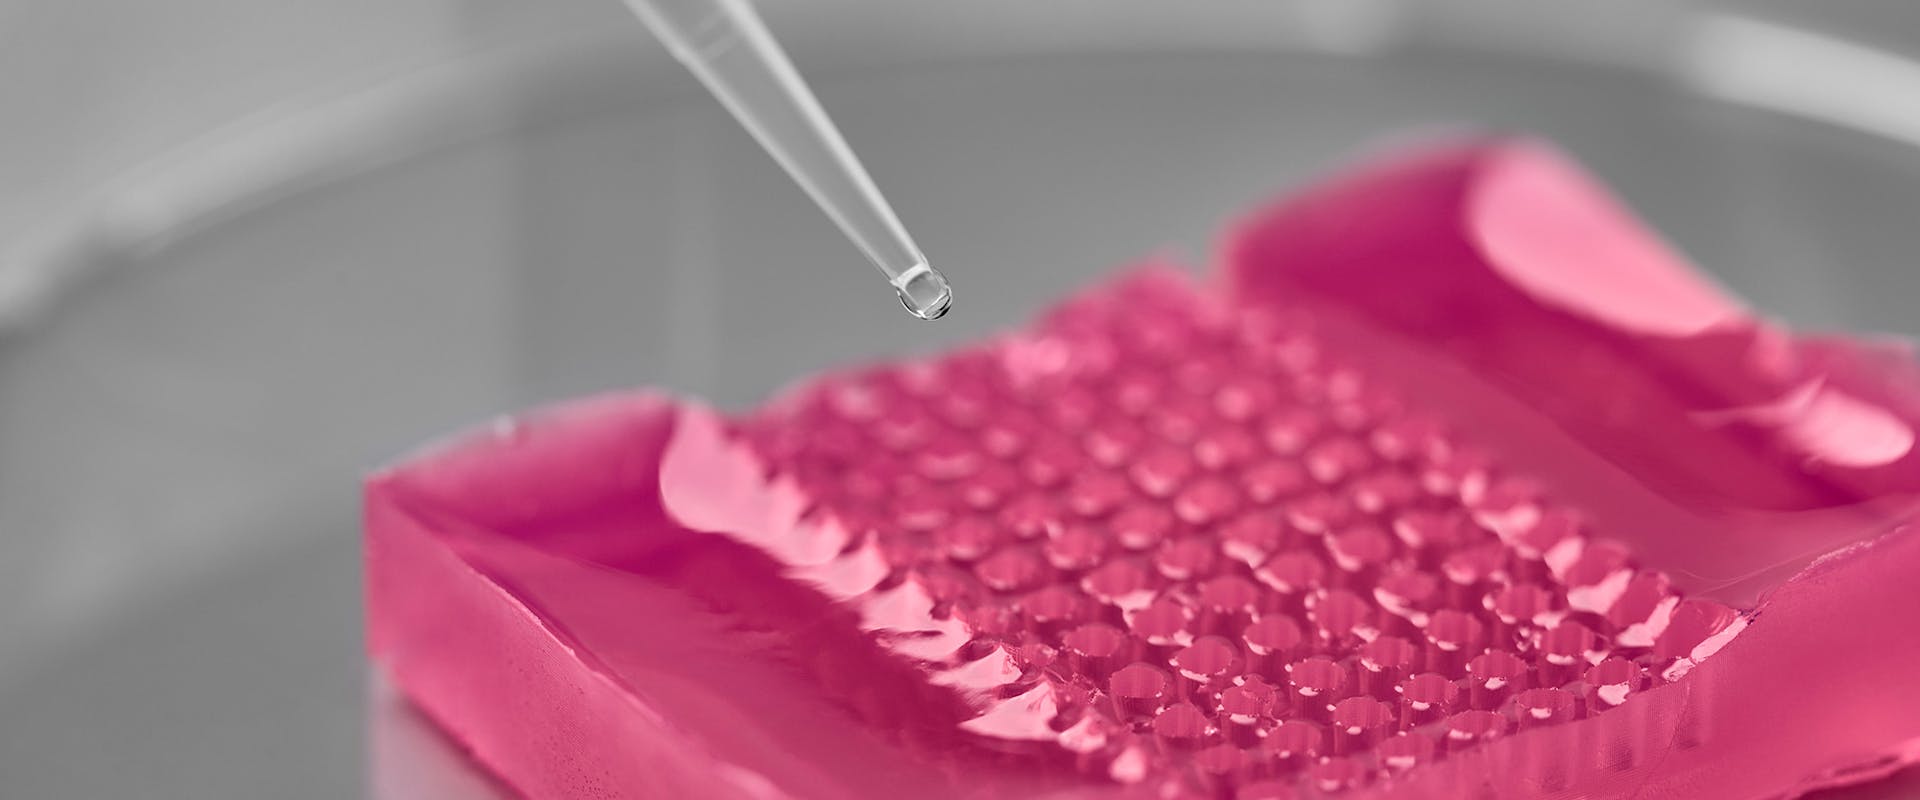 HistoBrick: a textured hydrogel-based plate enabling sectioning of 96 micro-tissue arrays throughout the paraffin-embedding histology process.